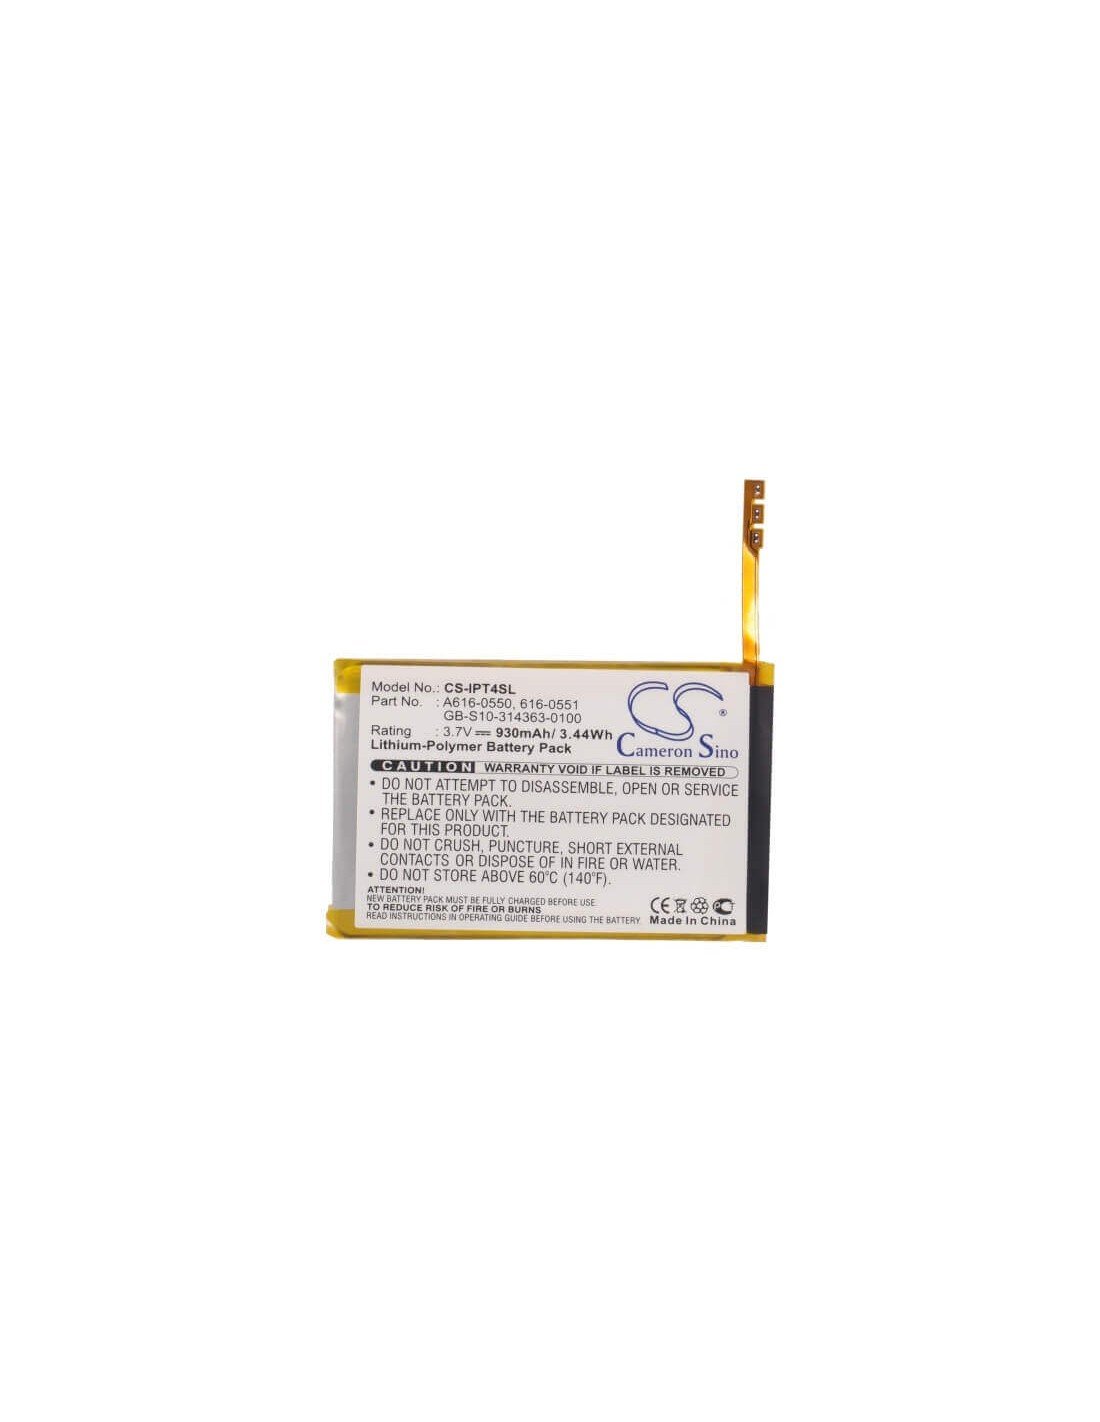 Battery for Apple Ipod Touch 4th 3.7V, 930mAh - 3.44Wh